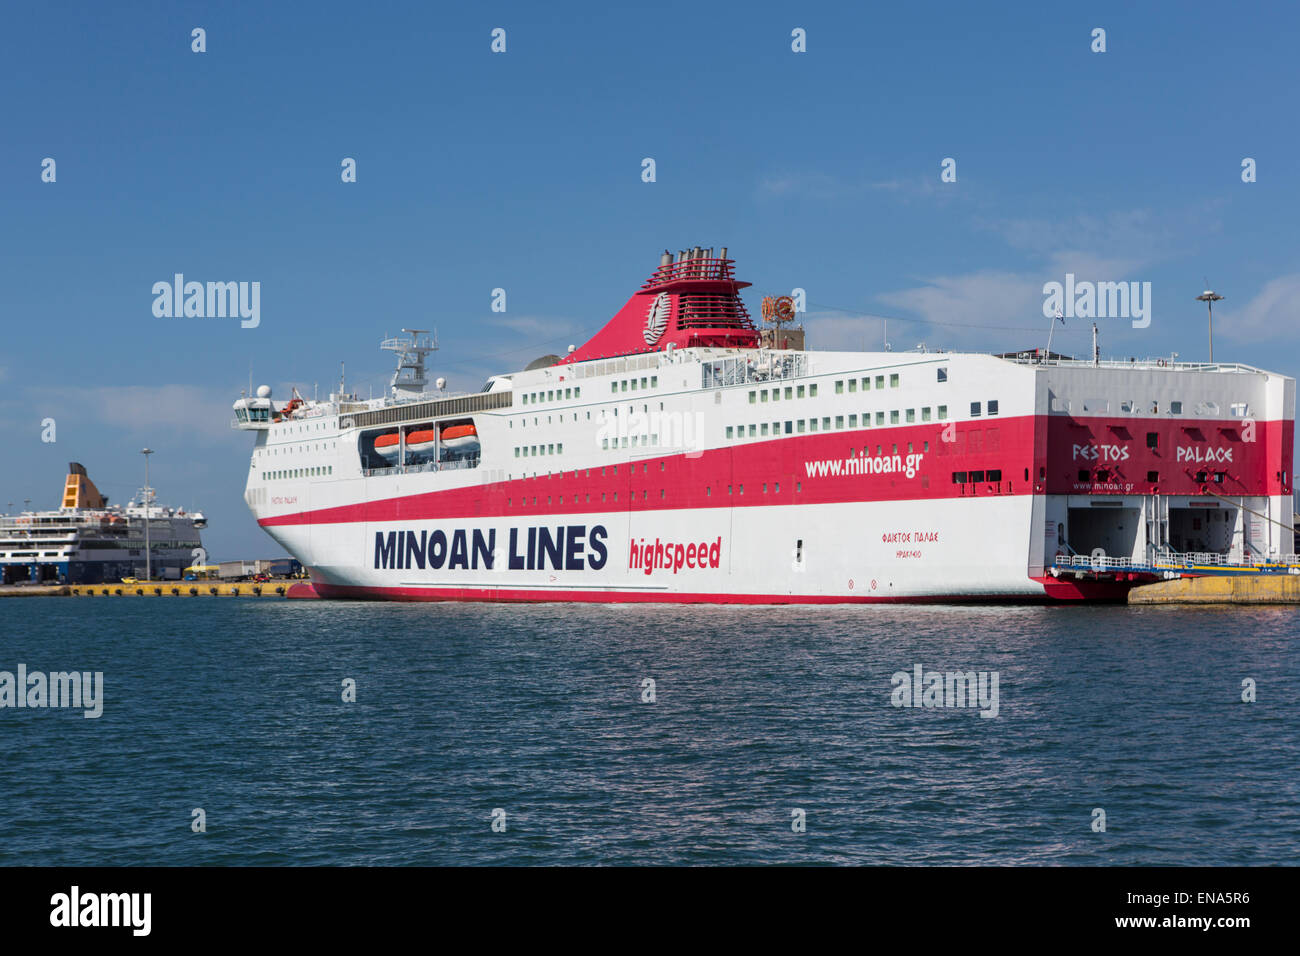 The Ro/Ro ferry Festos Palace (IMO 9204568) from Hellenic Seaways is ...